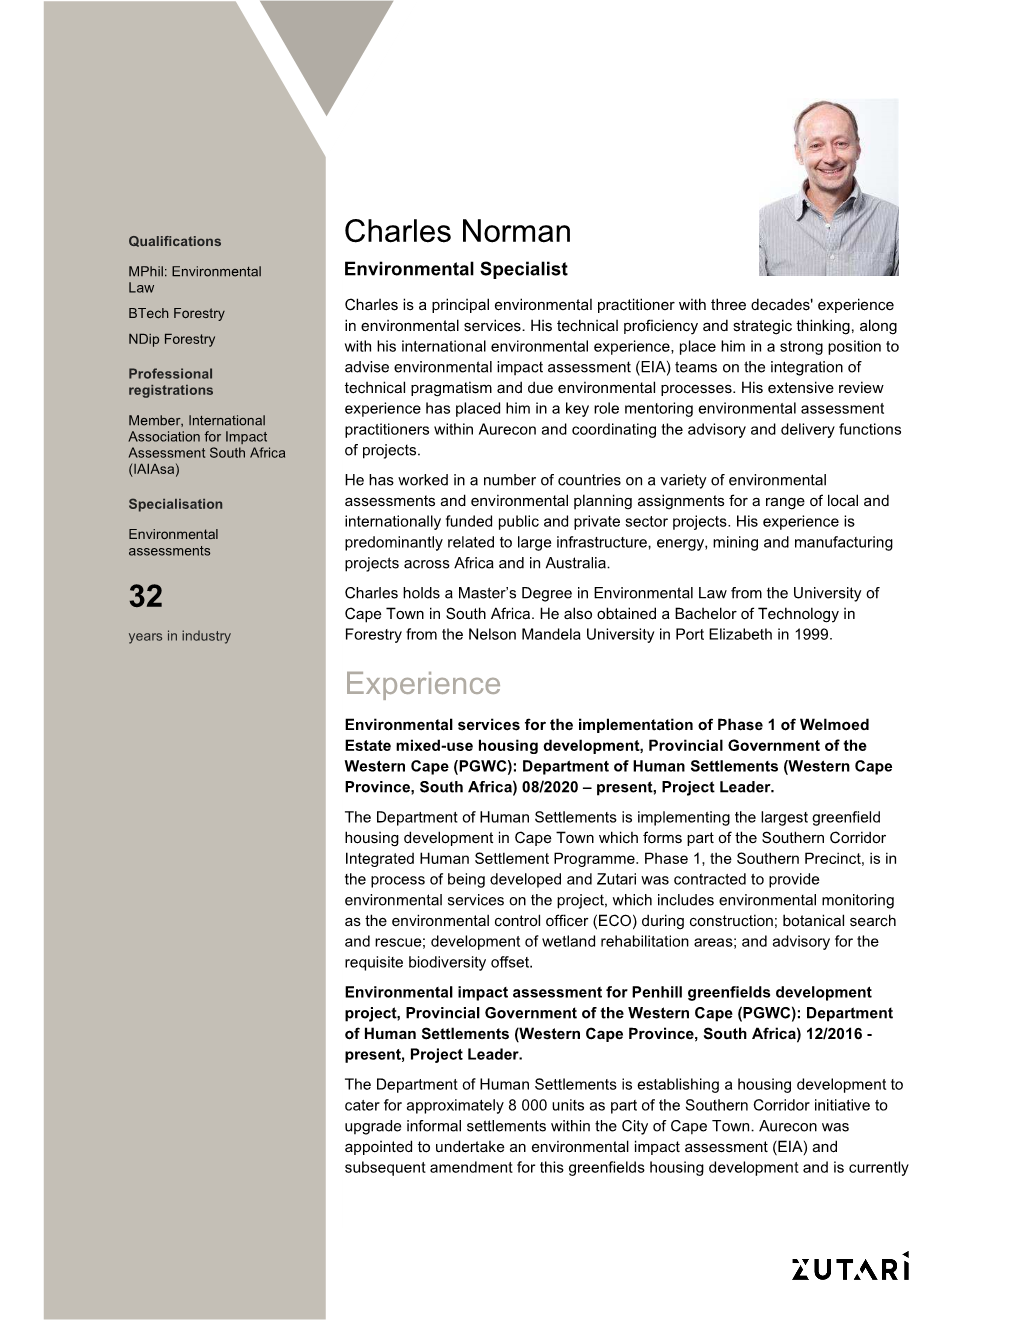 Experience Charles Norman 32